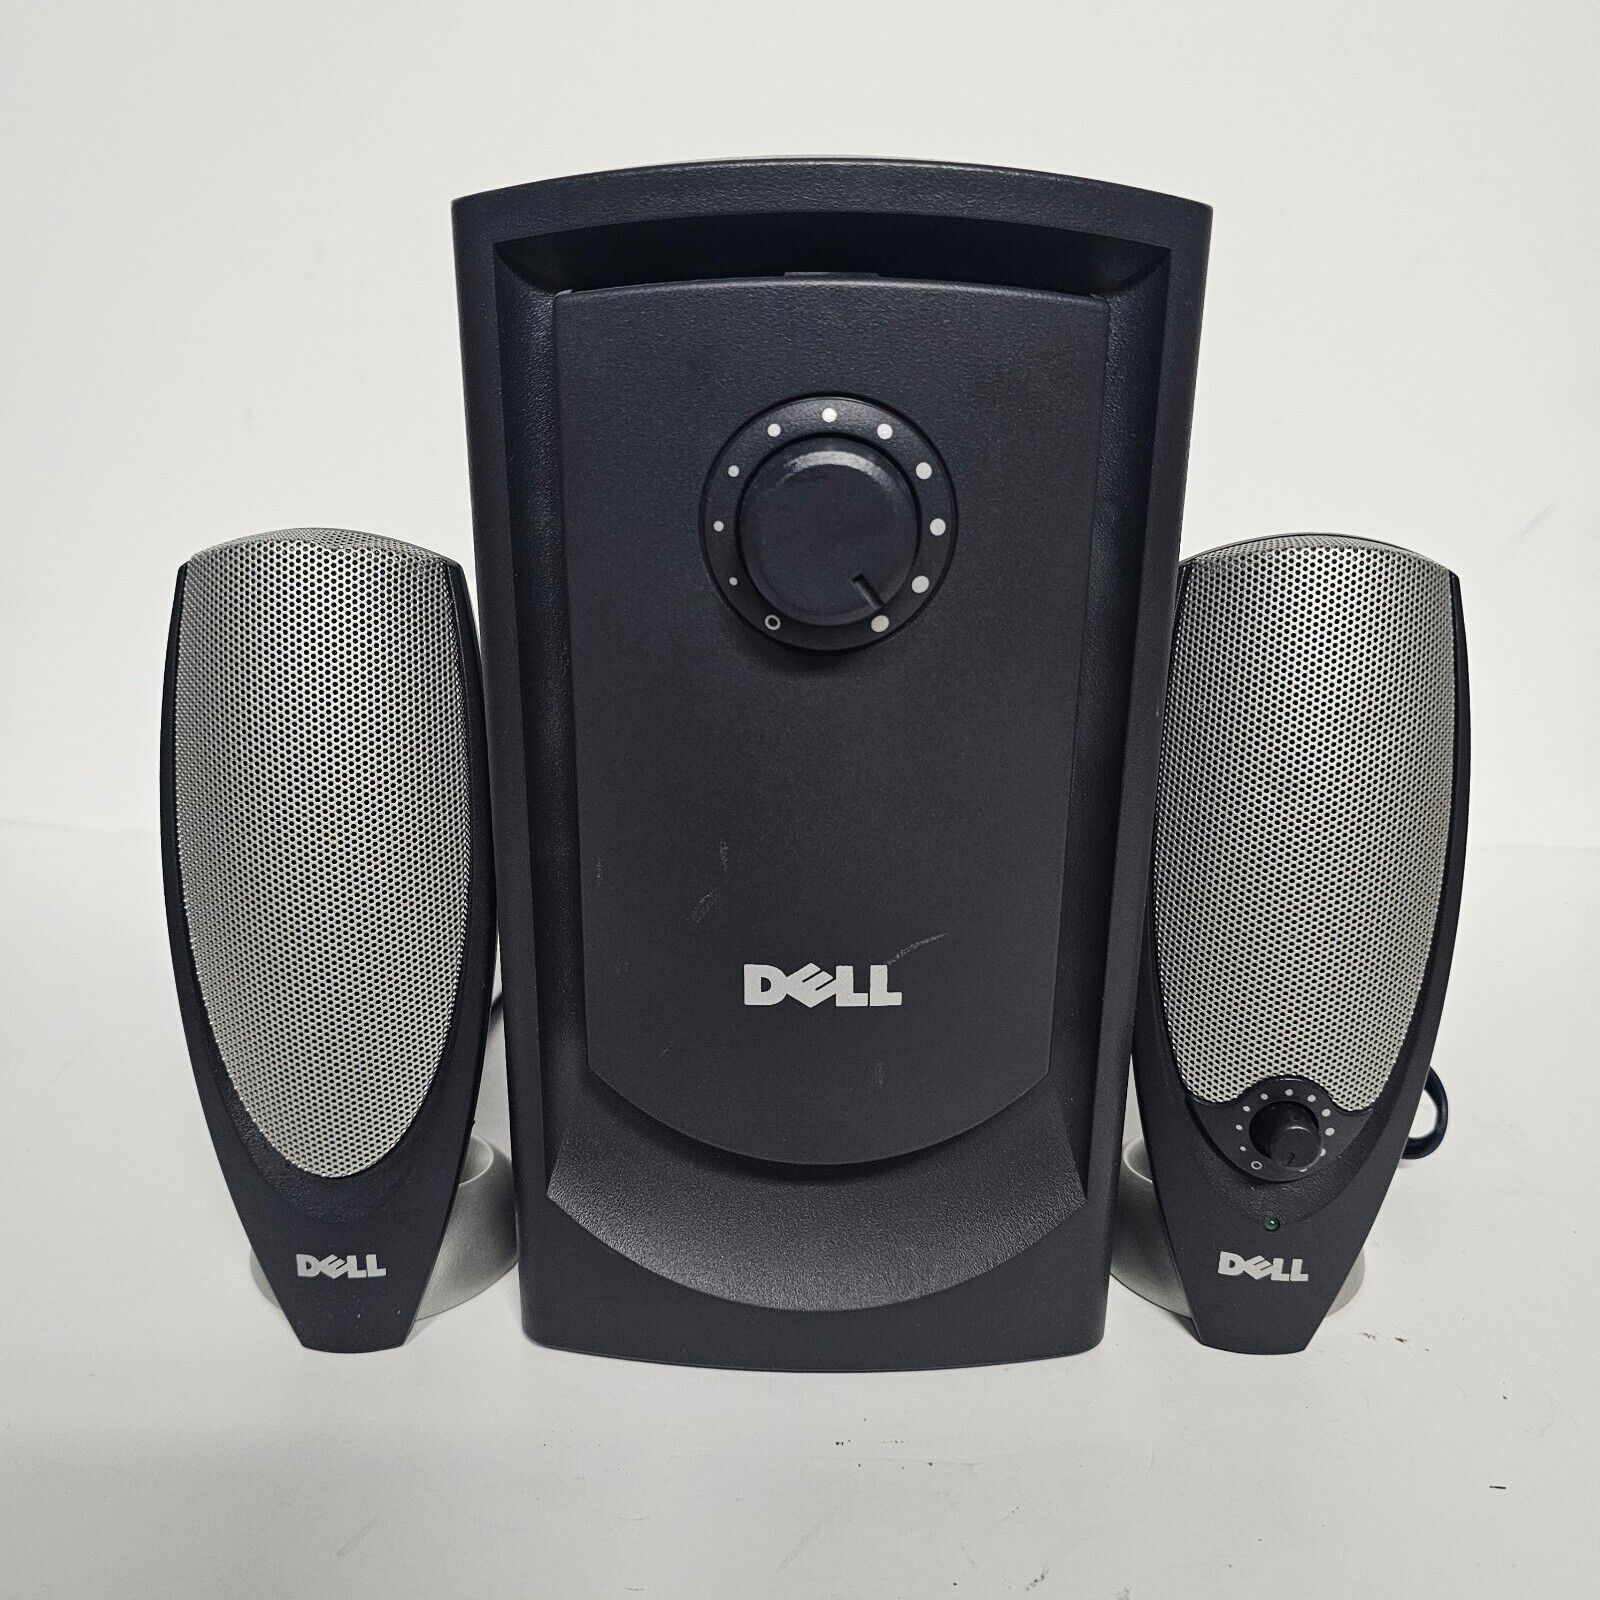 Dell A425 Zylux Multimedia Computer Speaker System w/ Subwoofer & Aux Cord